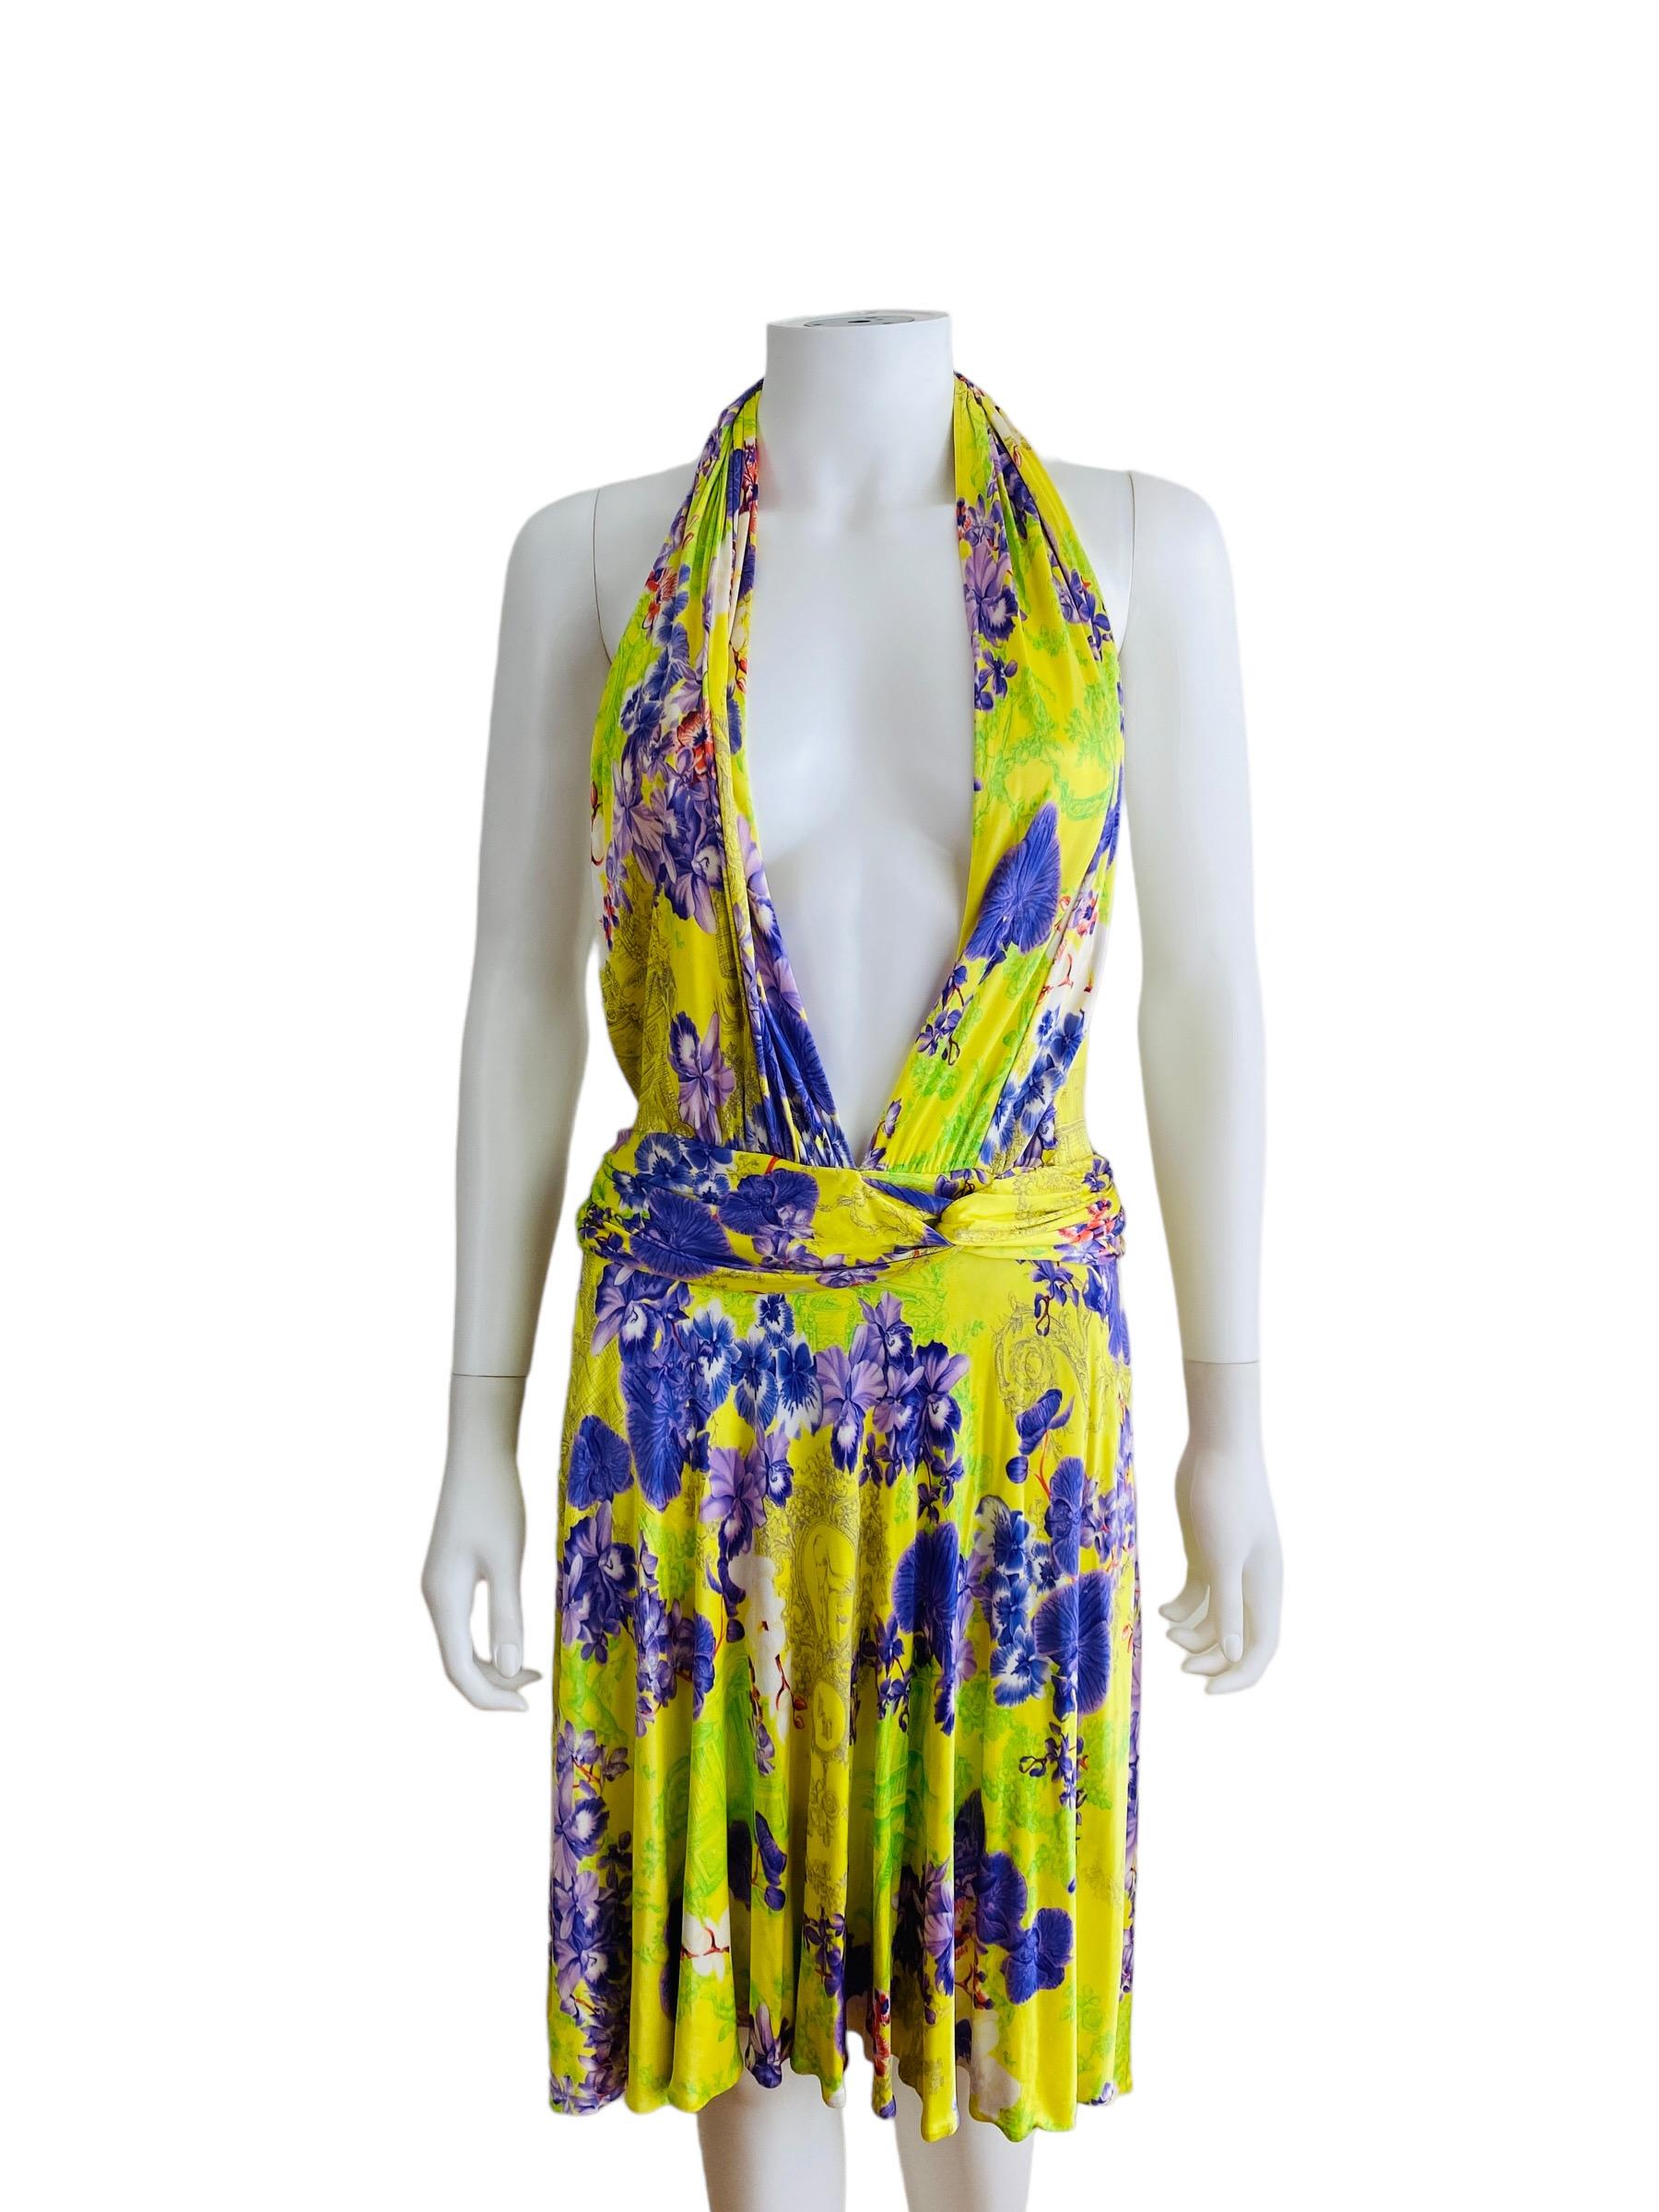 Vintage S/S 2004 Versace Dress Bright Yellow + Purple Orchid Floral Runway In Good Condition For Sale In Denver, CO